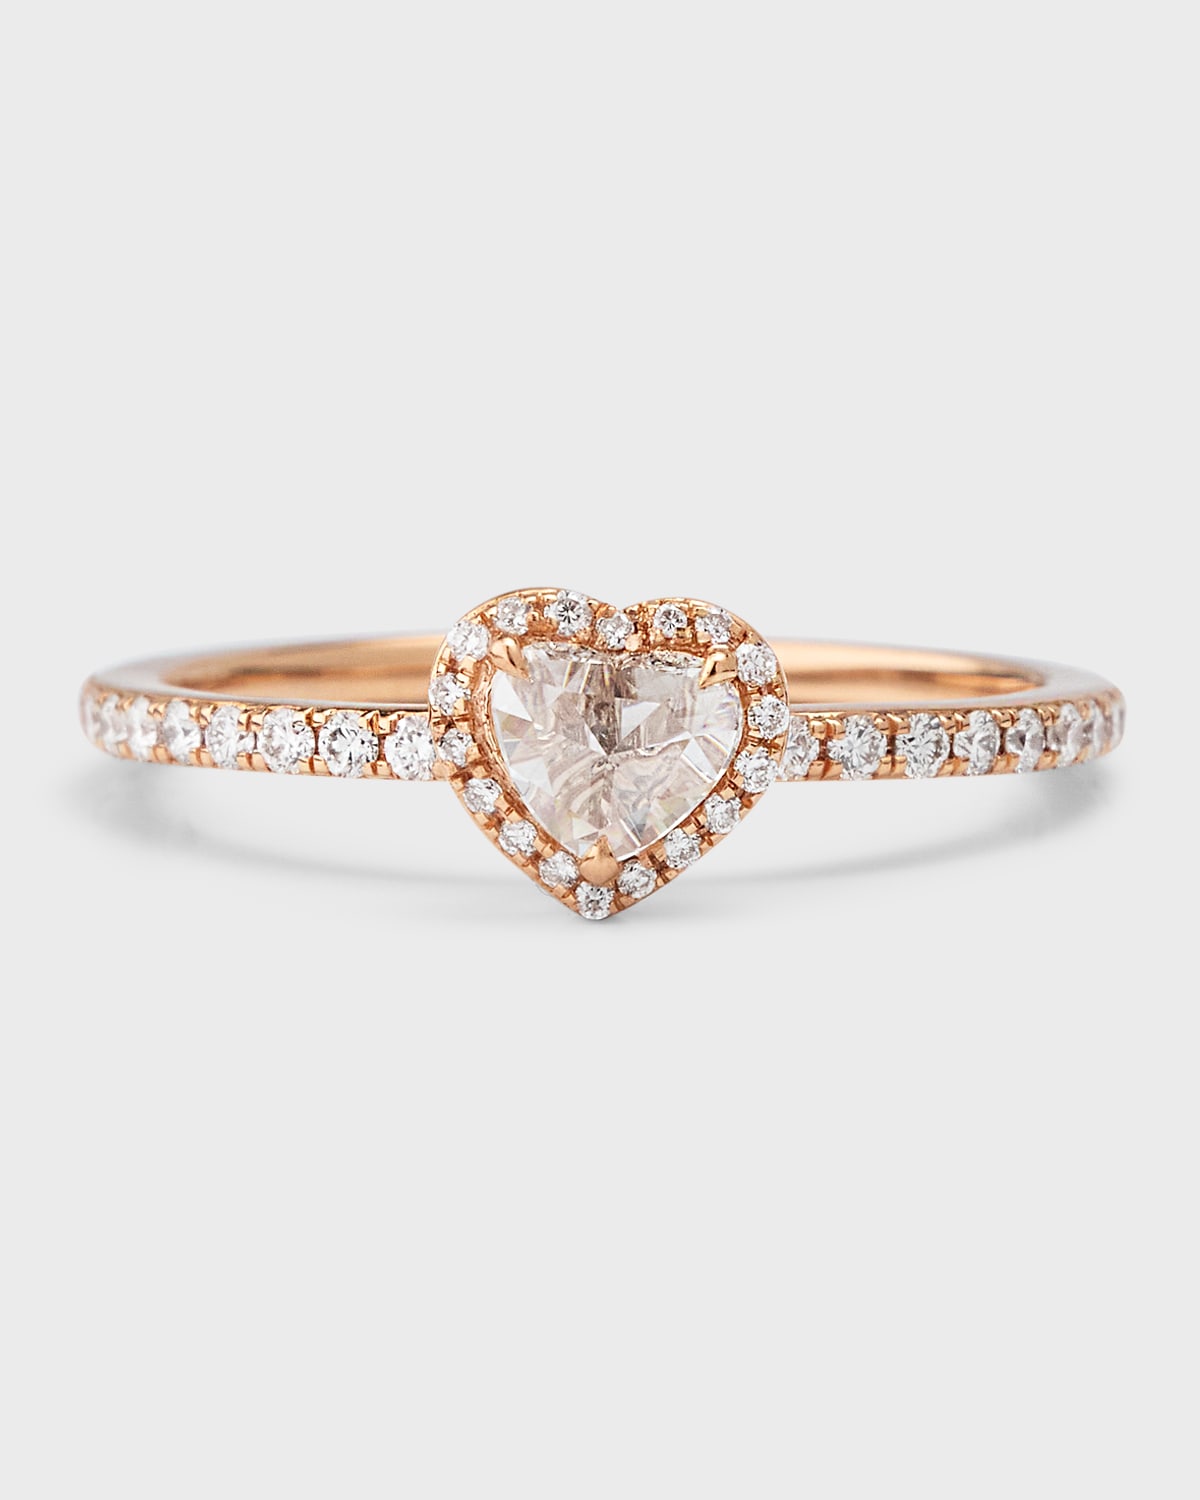 18K Rose Gold Heart Diamond Solitaire Ring, Size 6